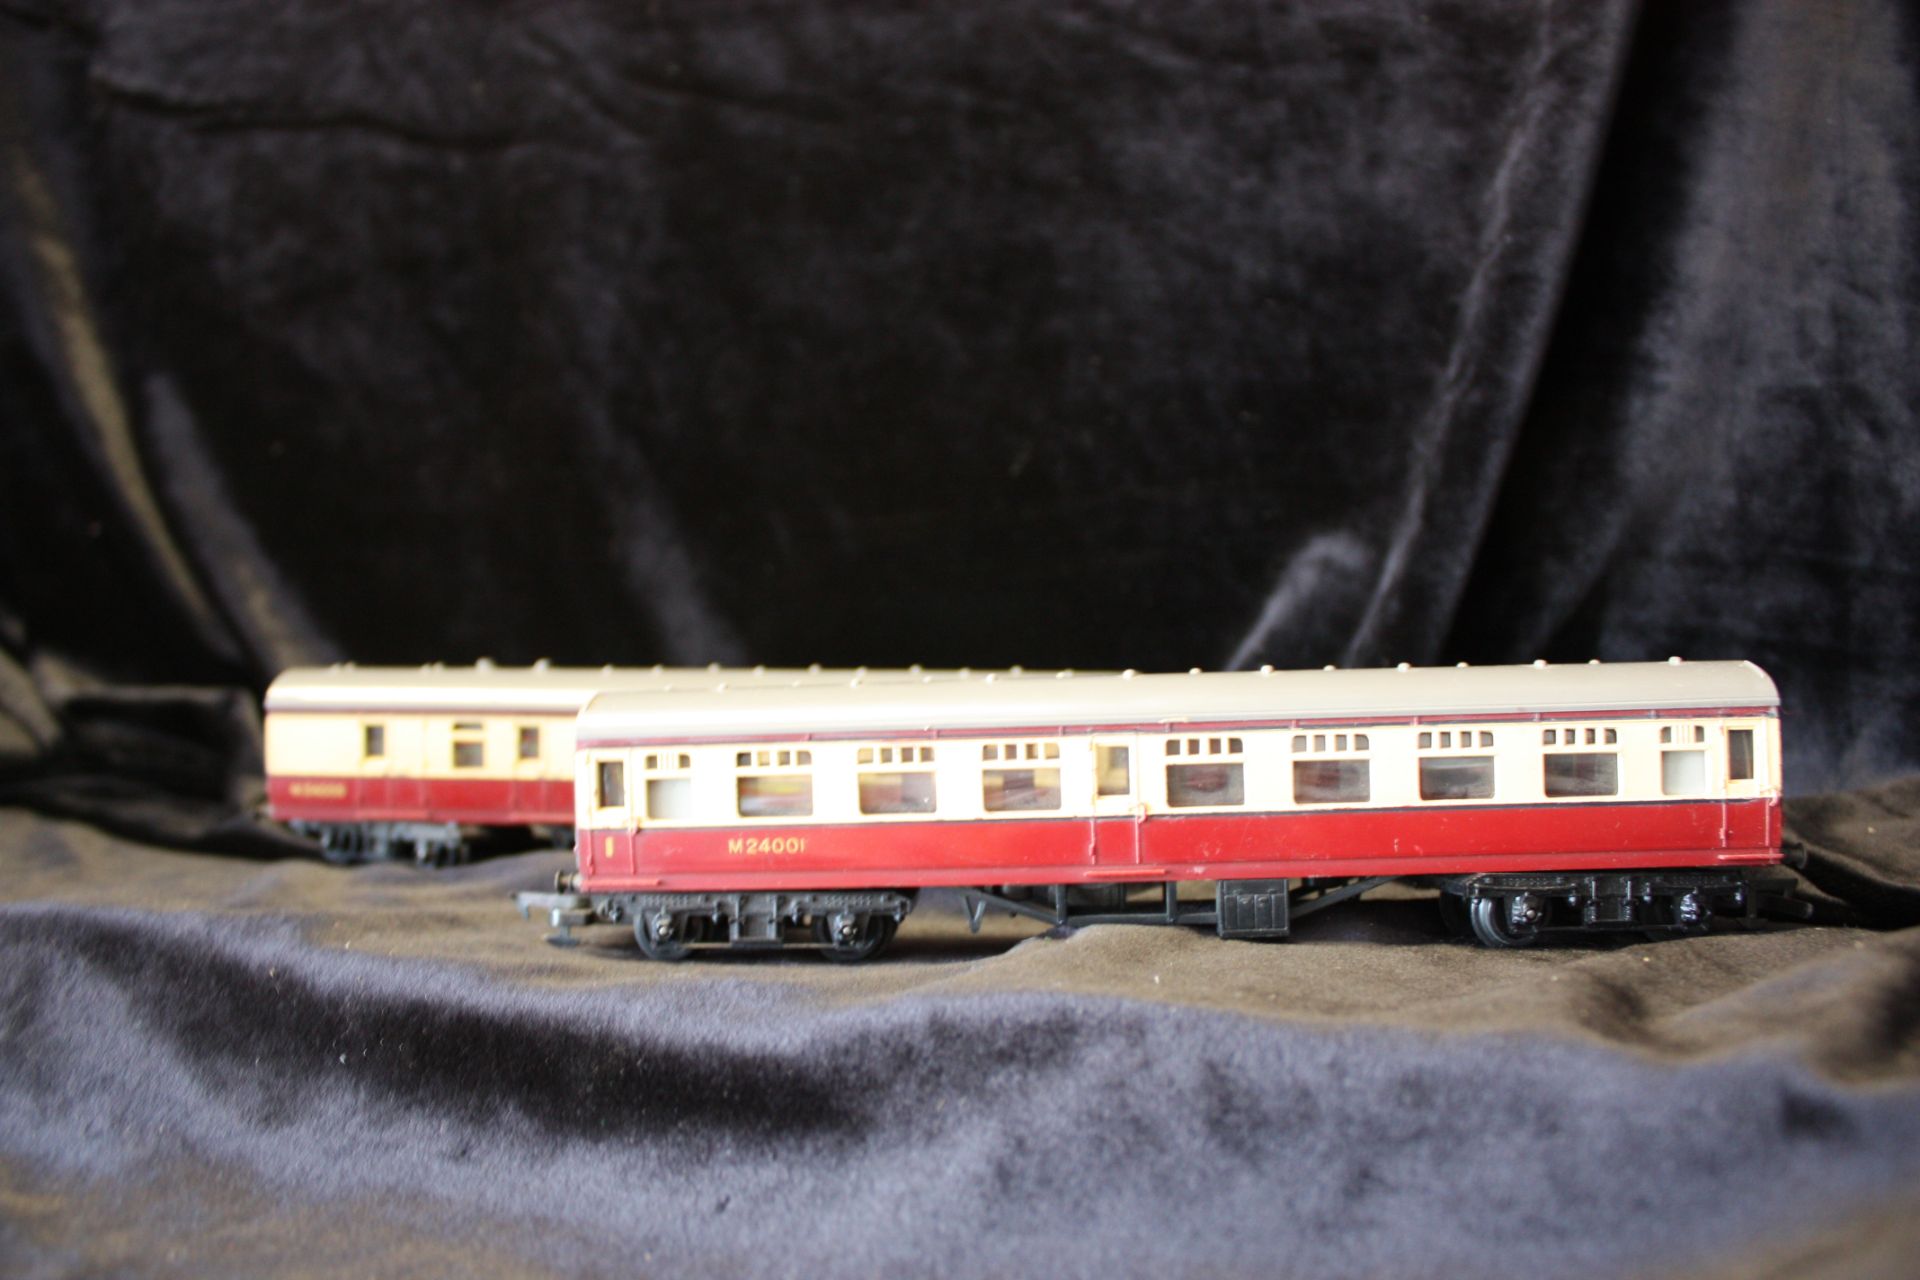 Pair of Triang Coaches - R29 No M24001 and R28 No M34000